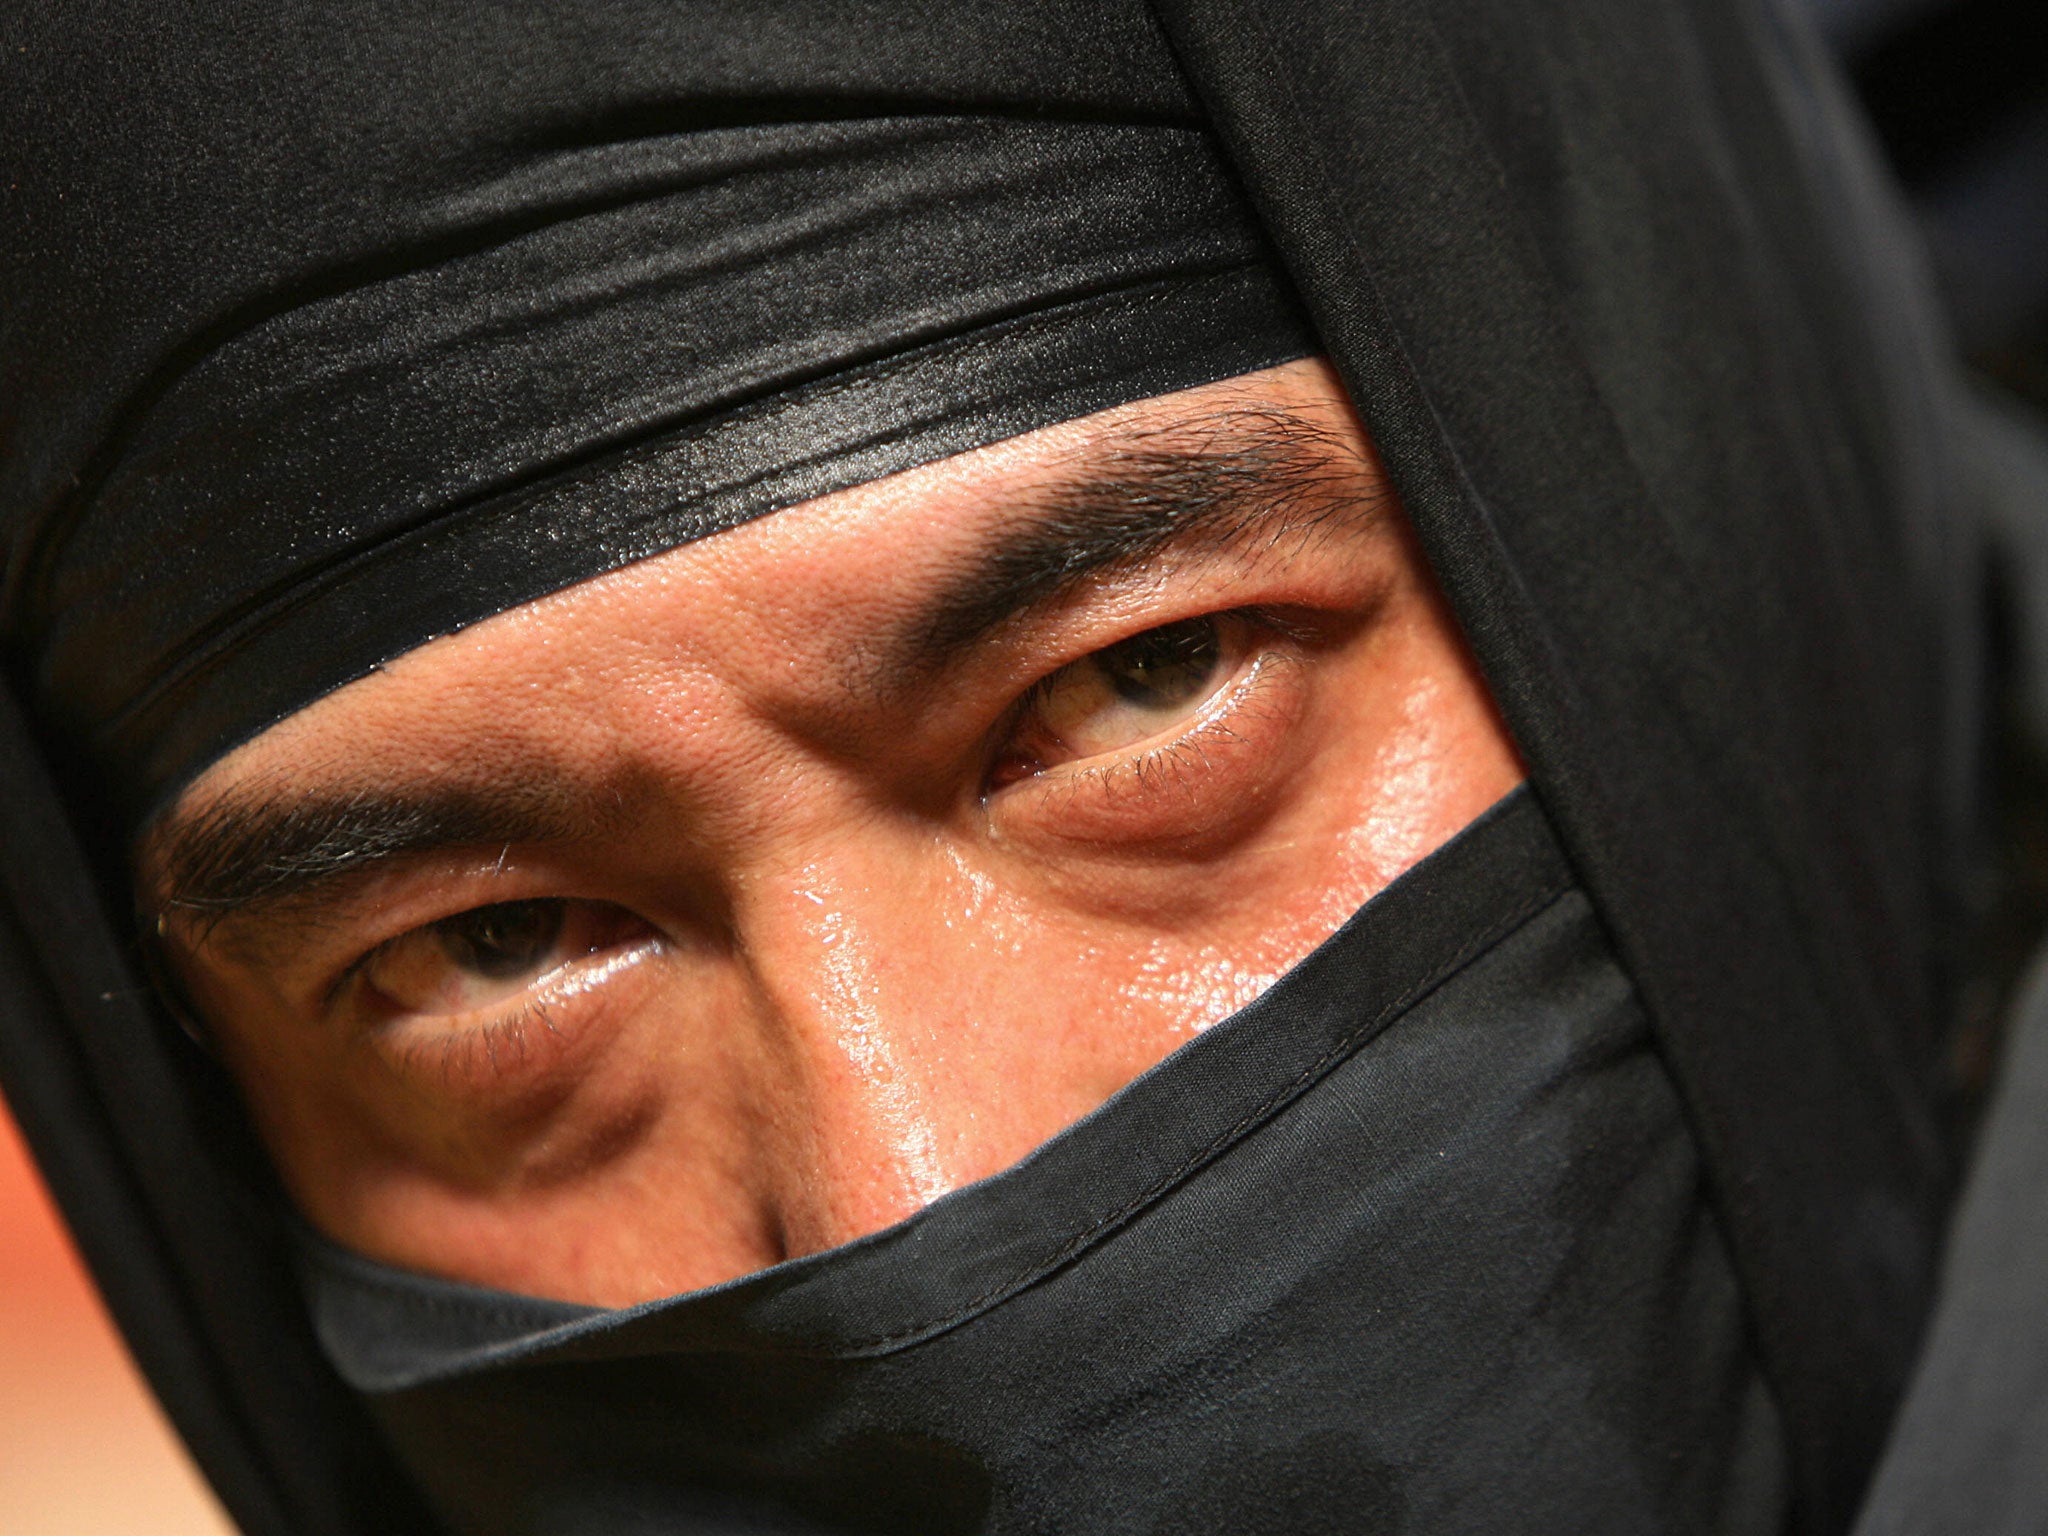 A Japanese Ninja poses after a performance at a cultural festival.